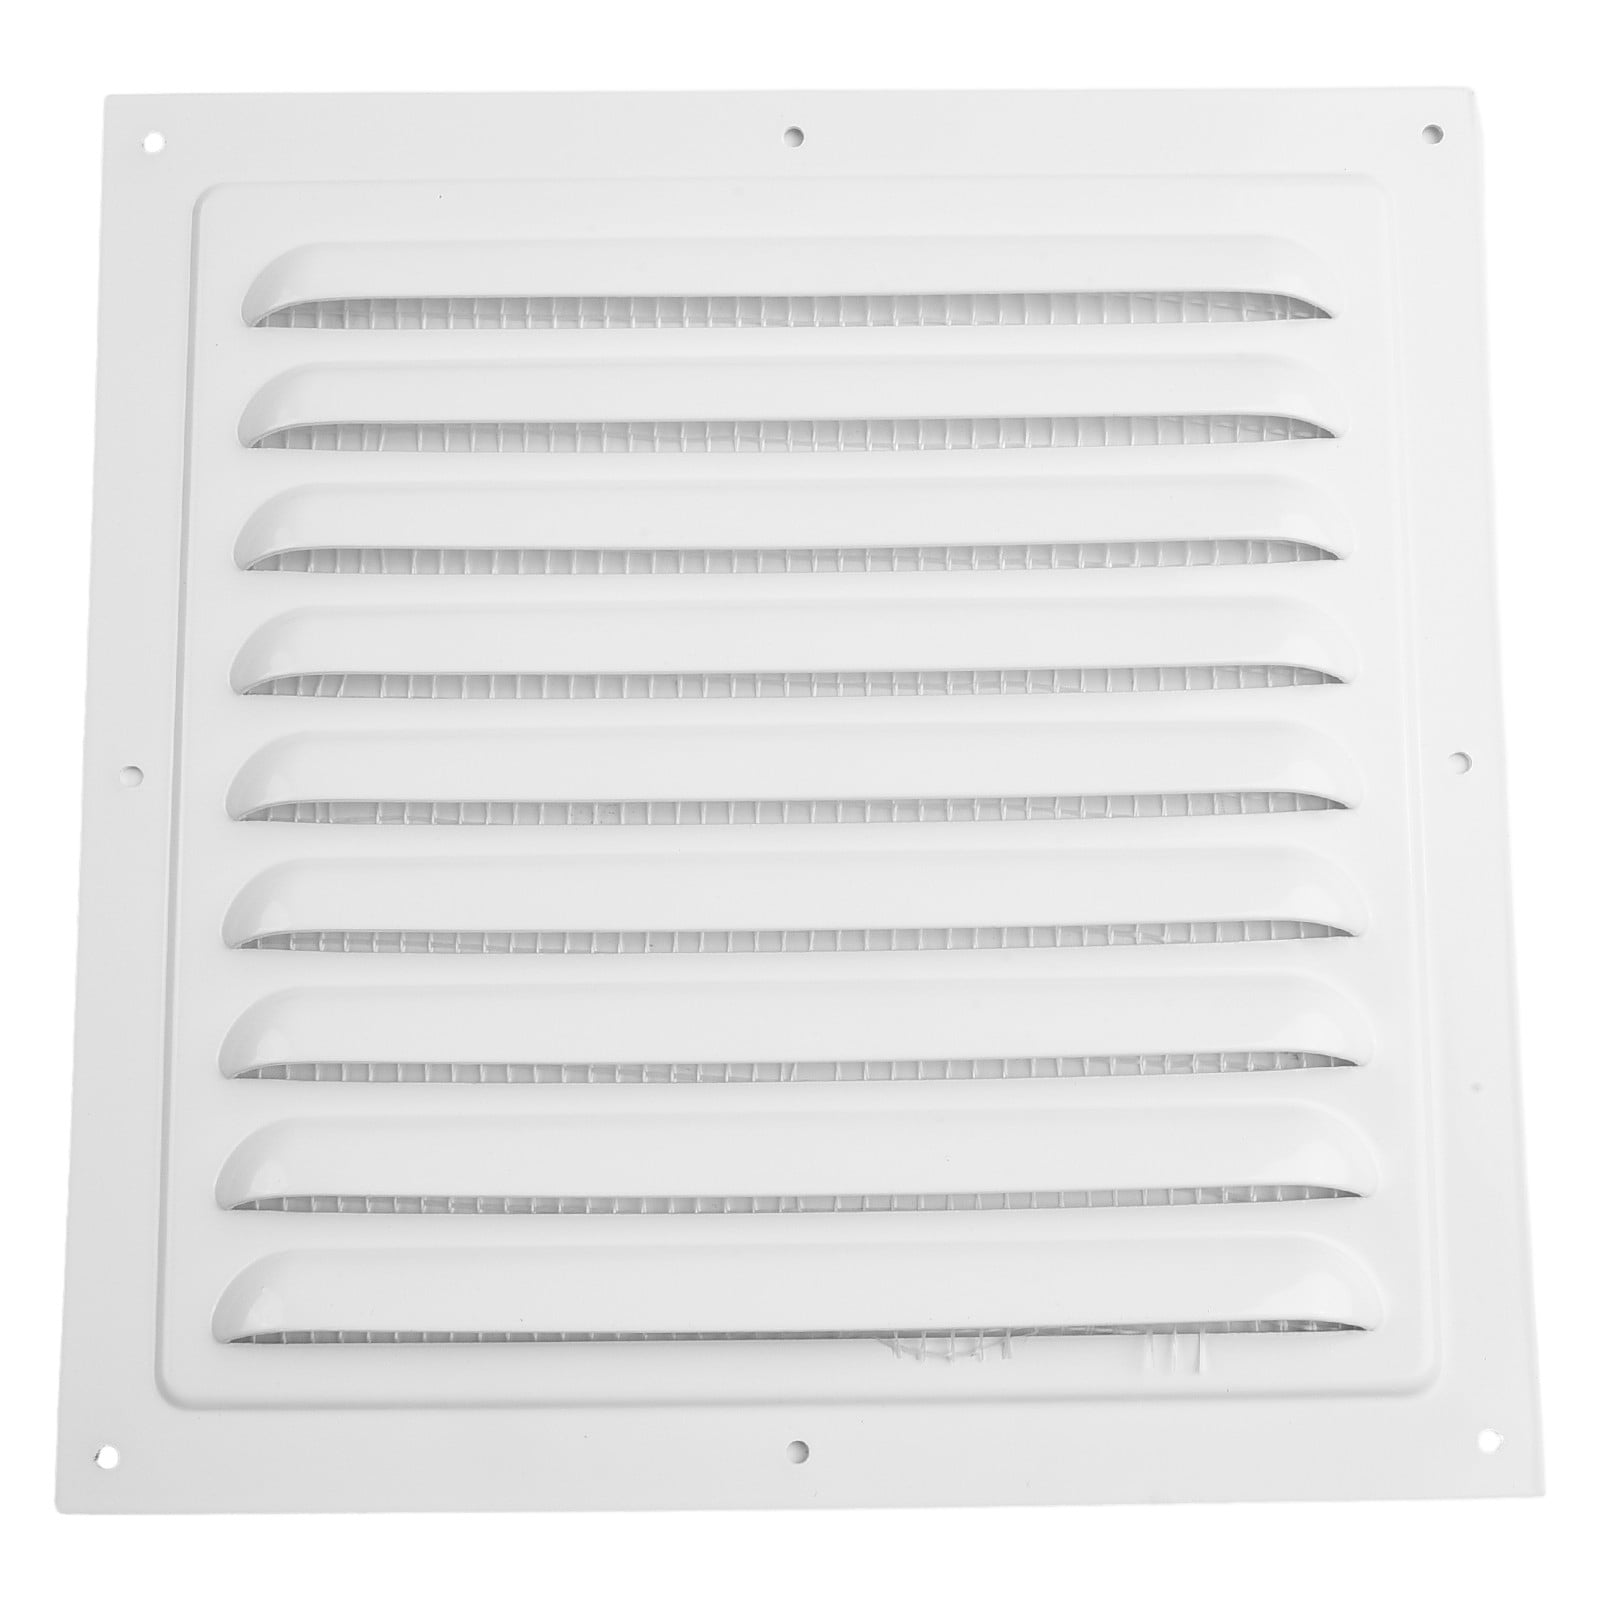 Magnetic Vent Covers 4 Pcs - HVAC Premium Anisotropic 1.5mm Optimal Thickness - 5.5 x 12 inch - for Wall, Floor, Ceiling Vent Covers - Trap & Seal Air